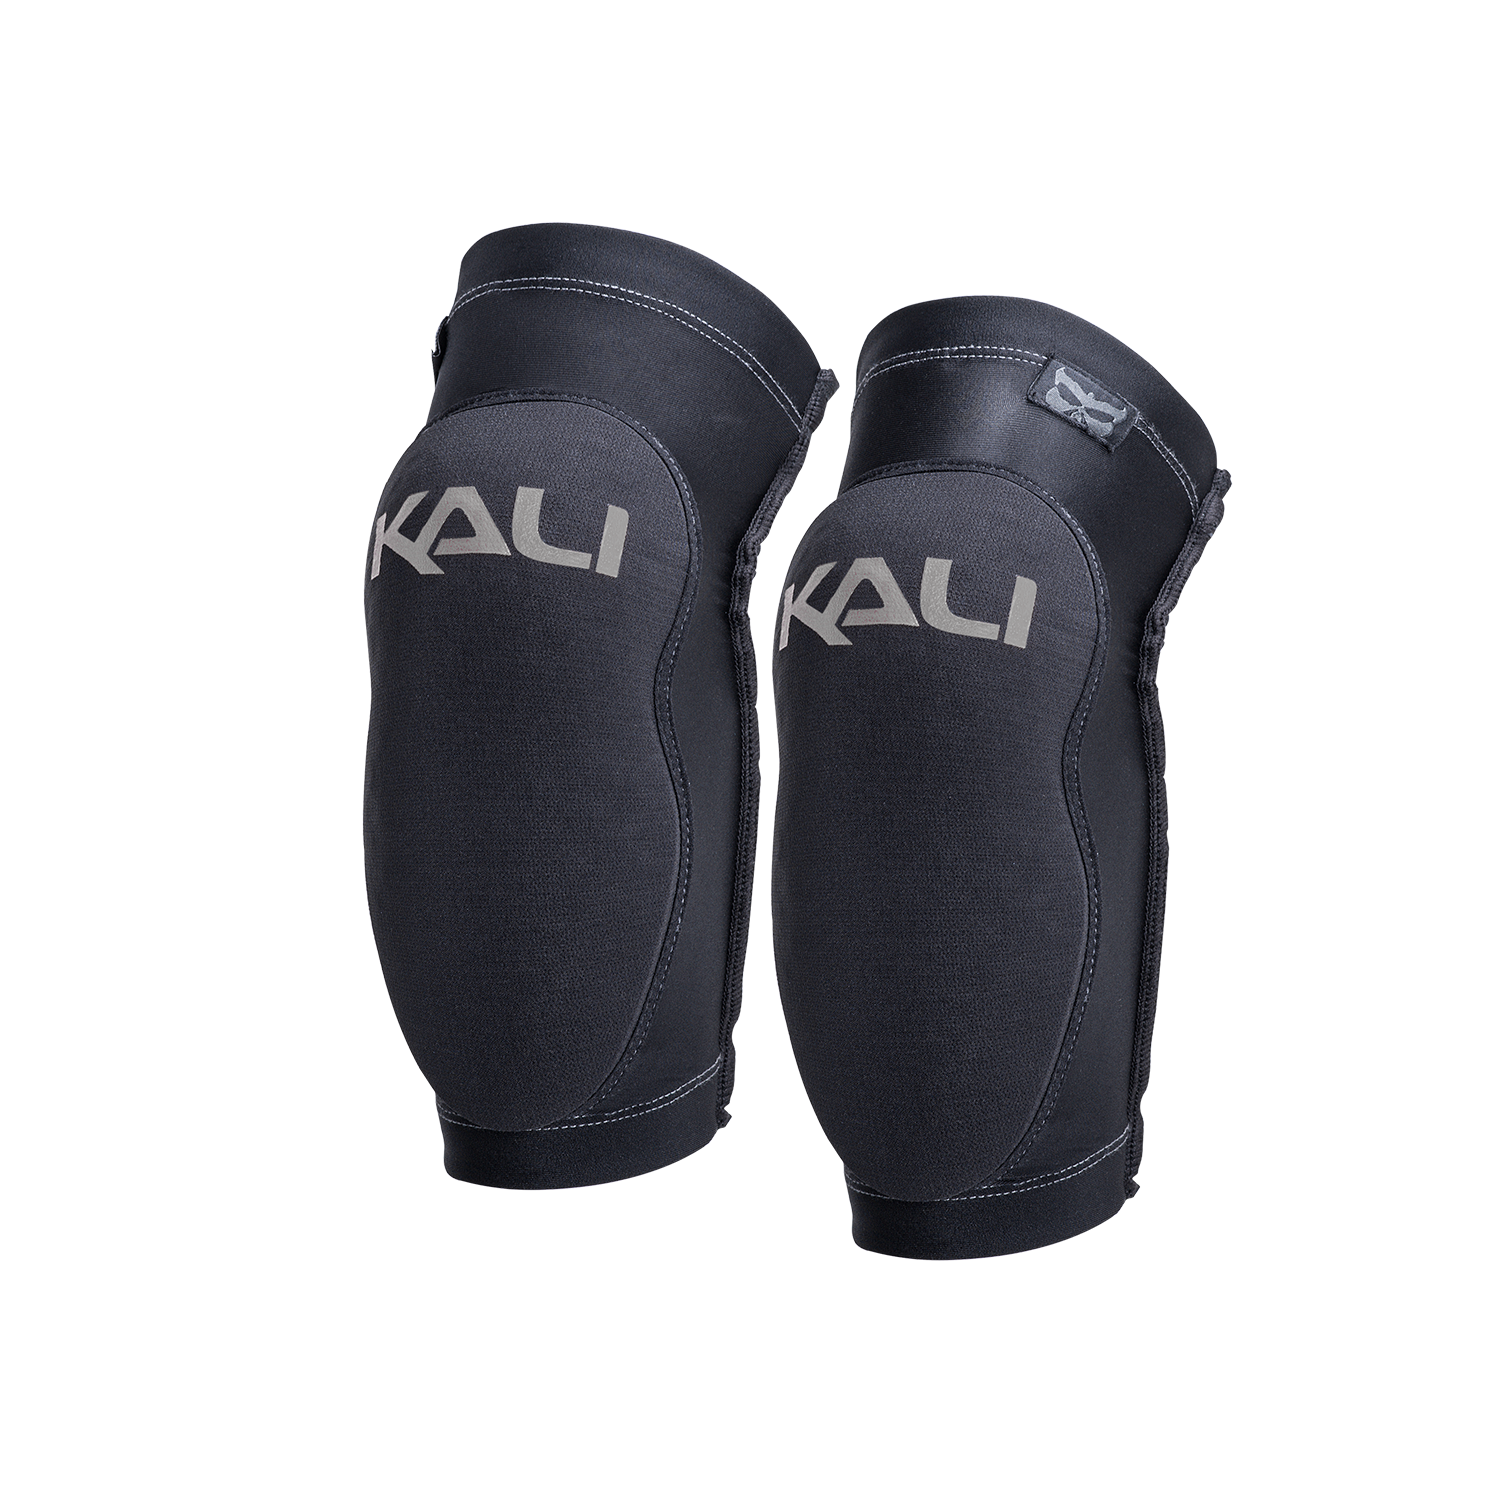 Mission Elbow Guards